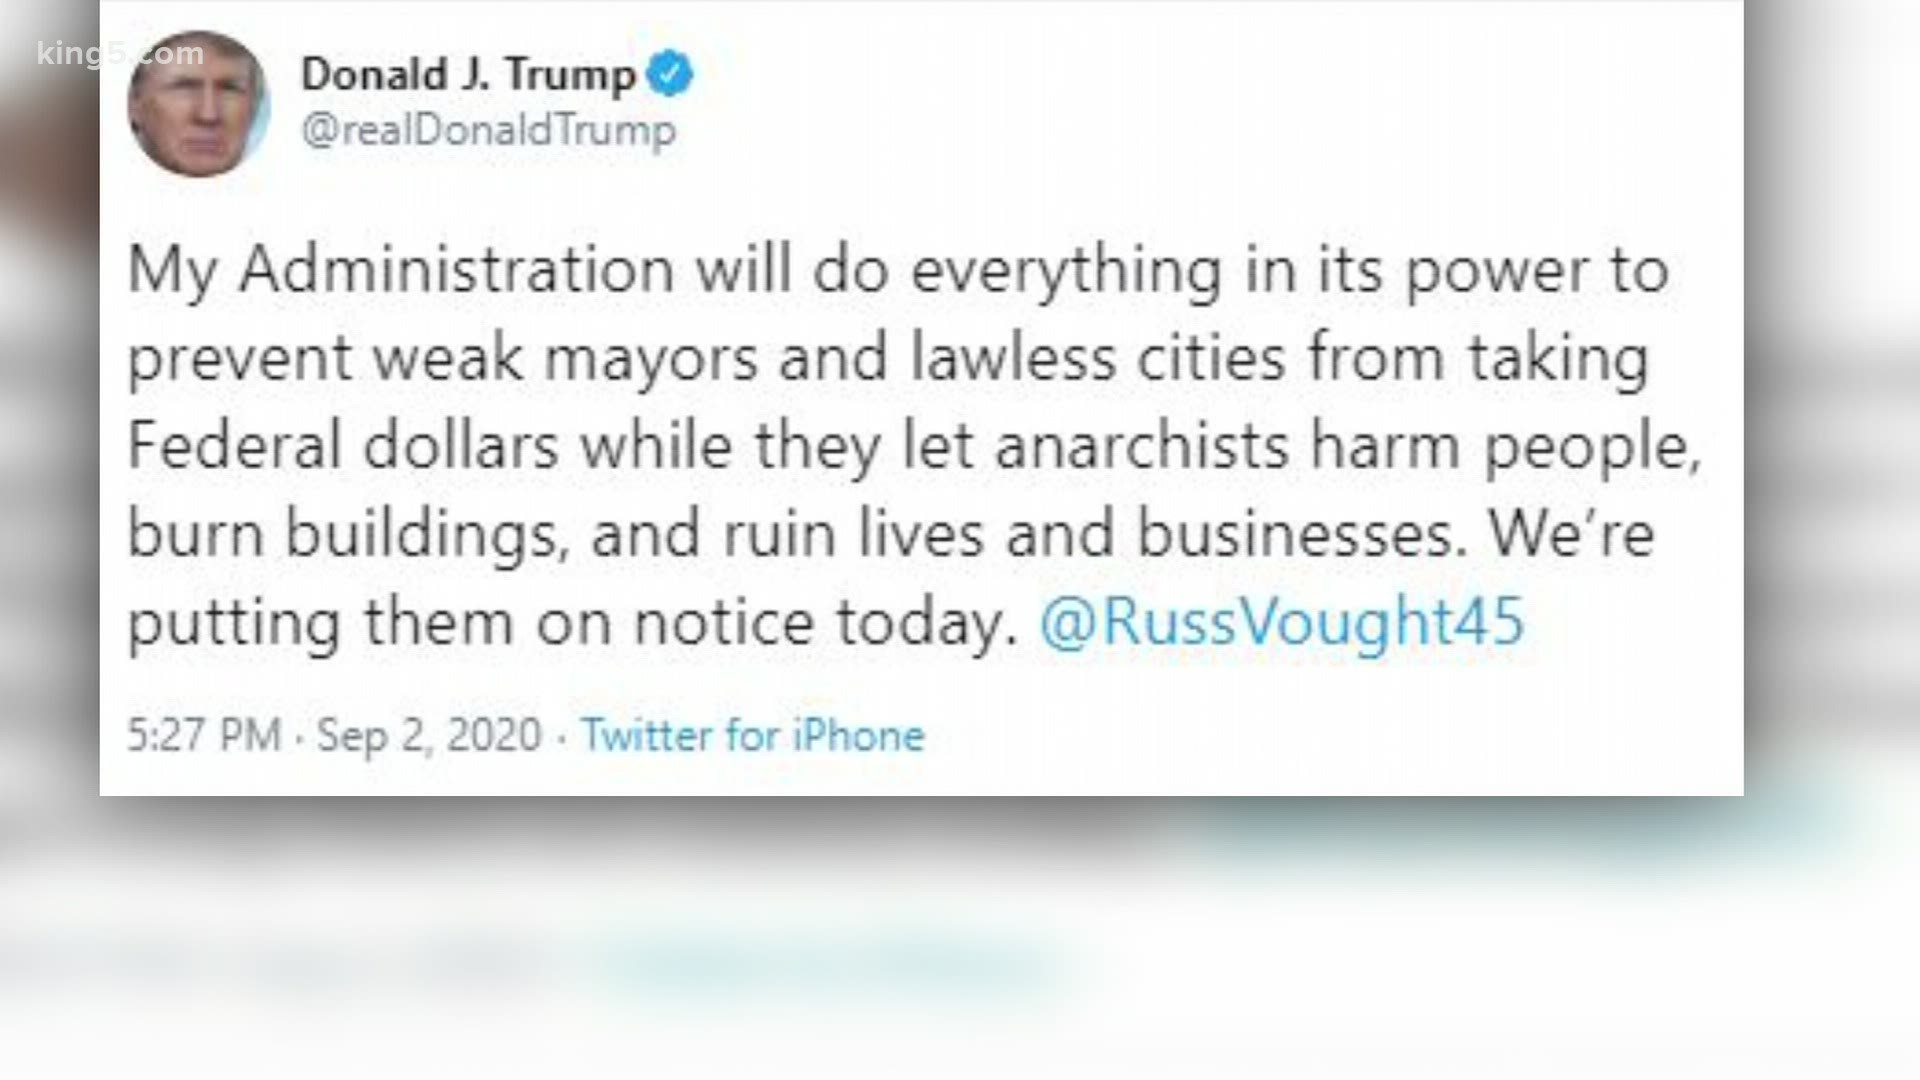 President Donald Trump has ordered a federal review of ways to defund the city of Seattle and other cities he deemed "lawless" after protests over police brutality.